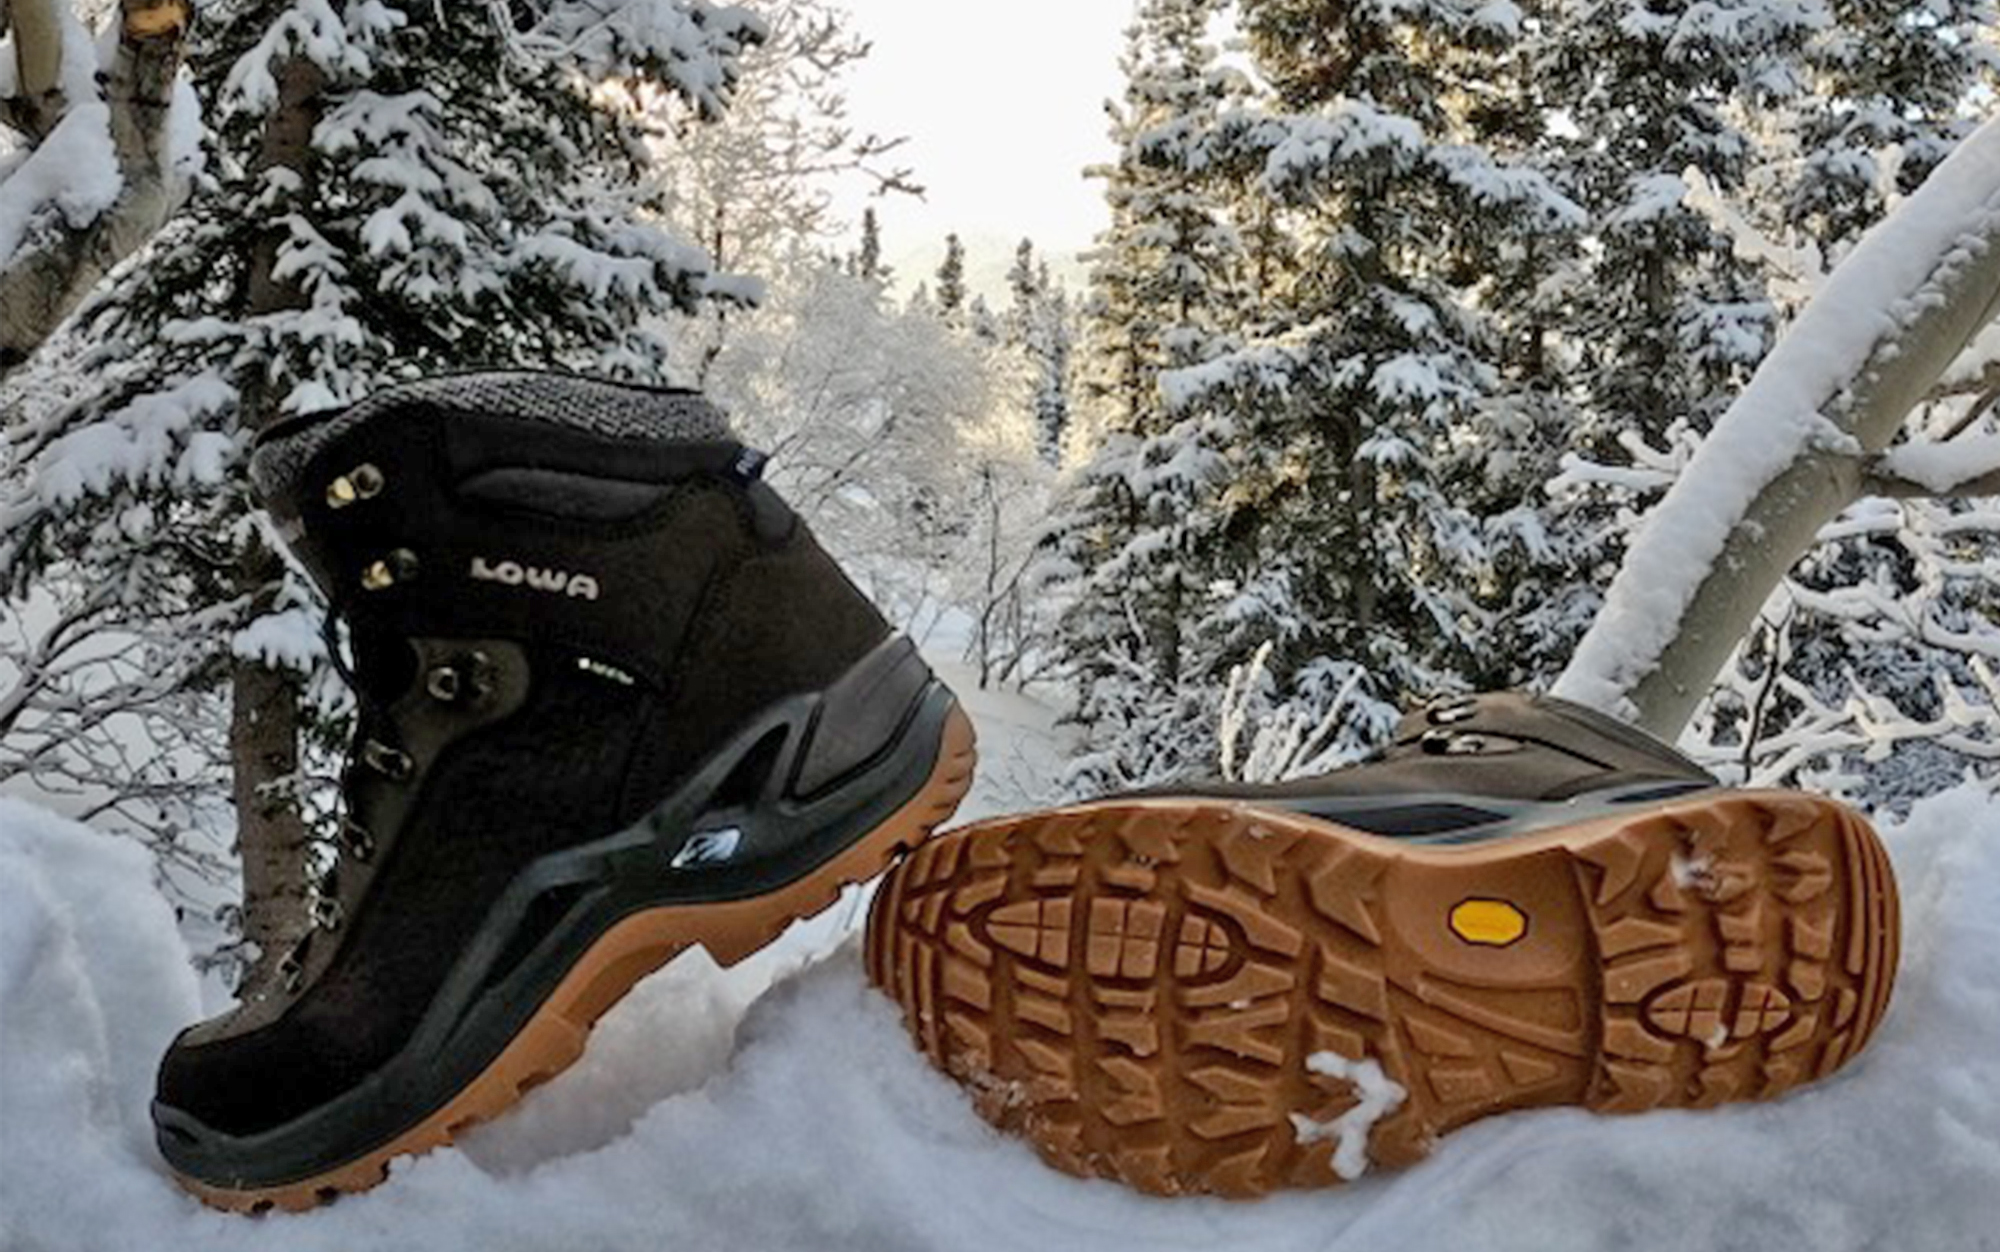 The Lowa Renegade Warm GTX Mid are the best hiking boots for men in the snow and ice.